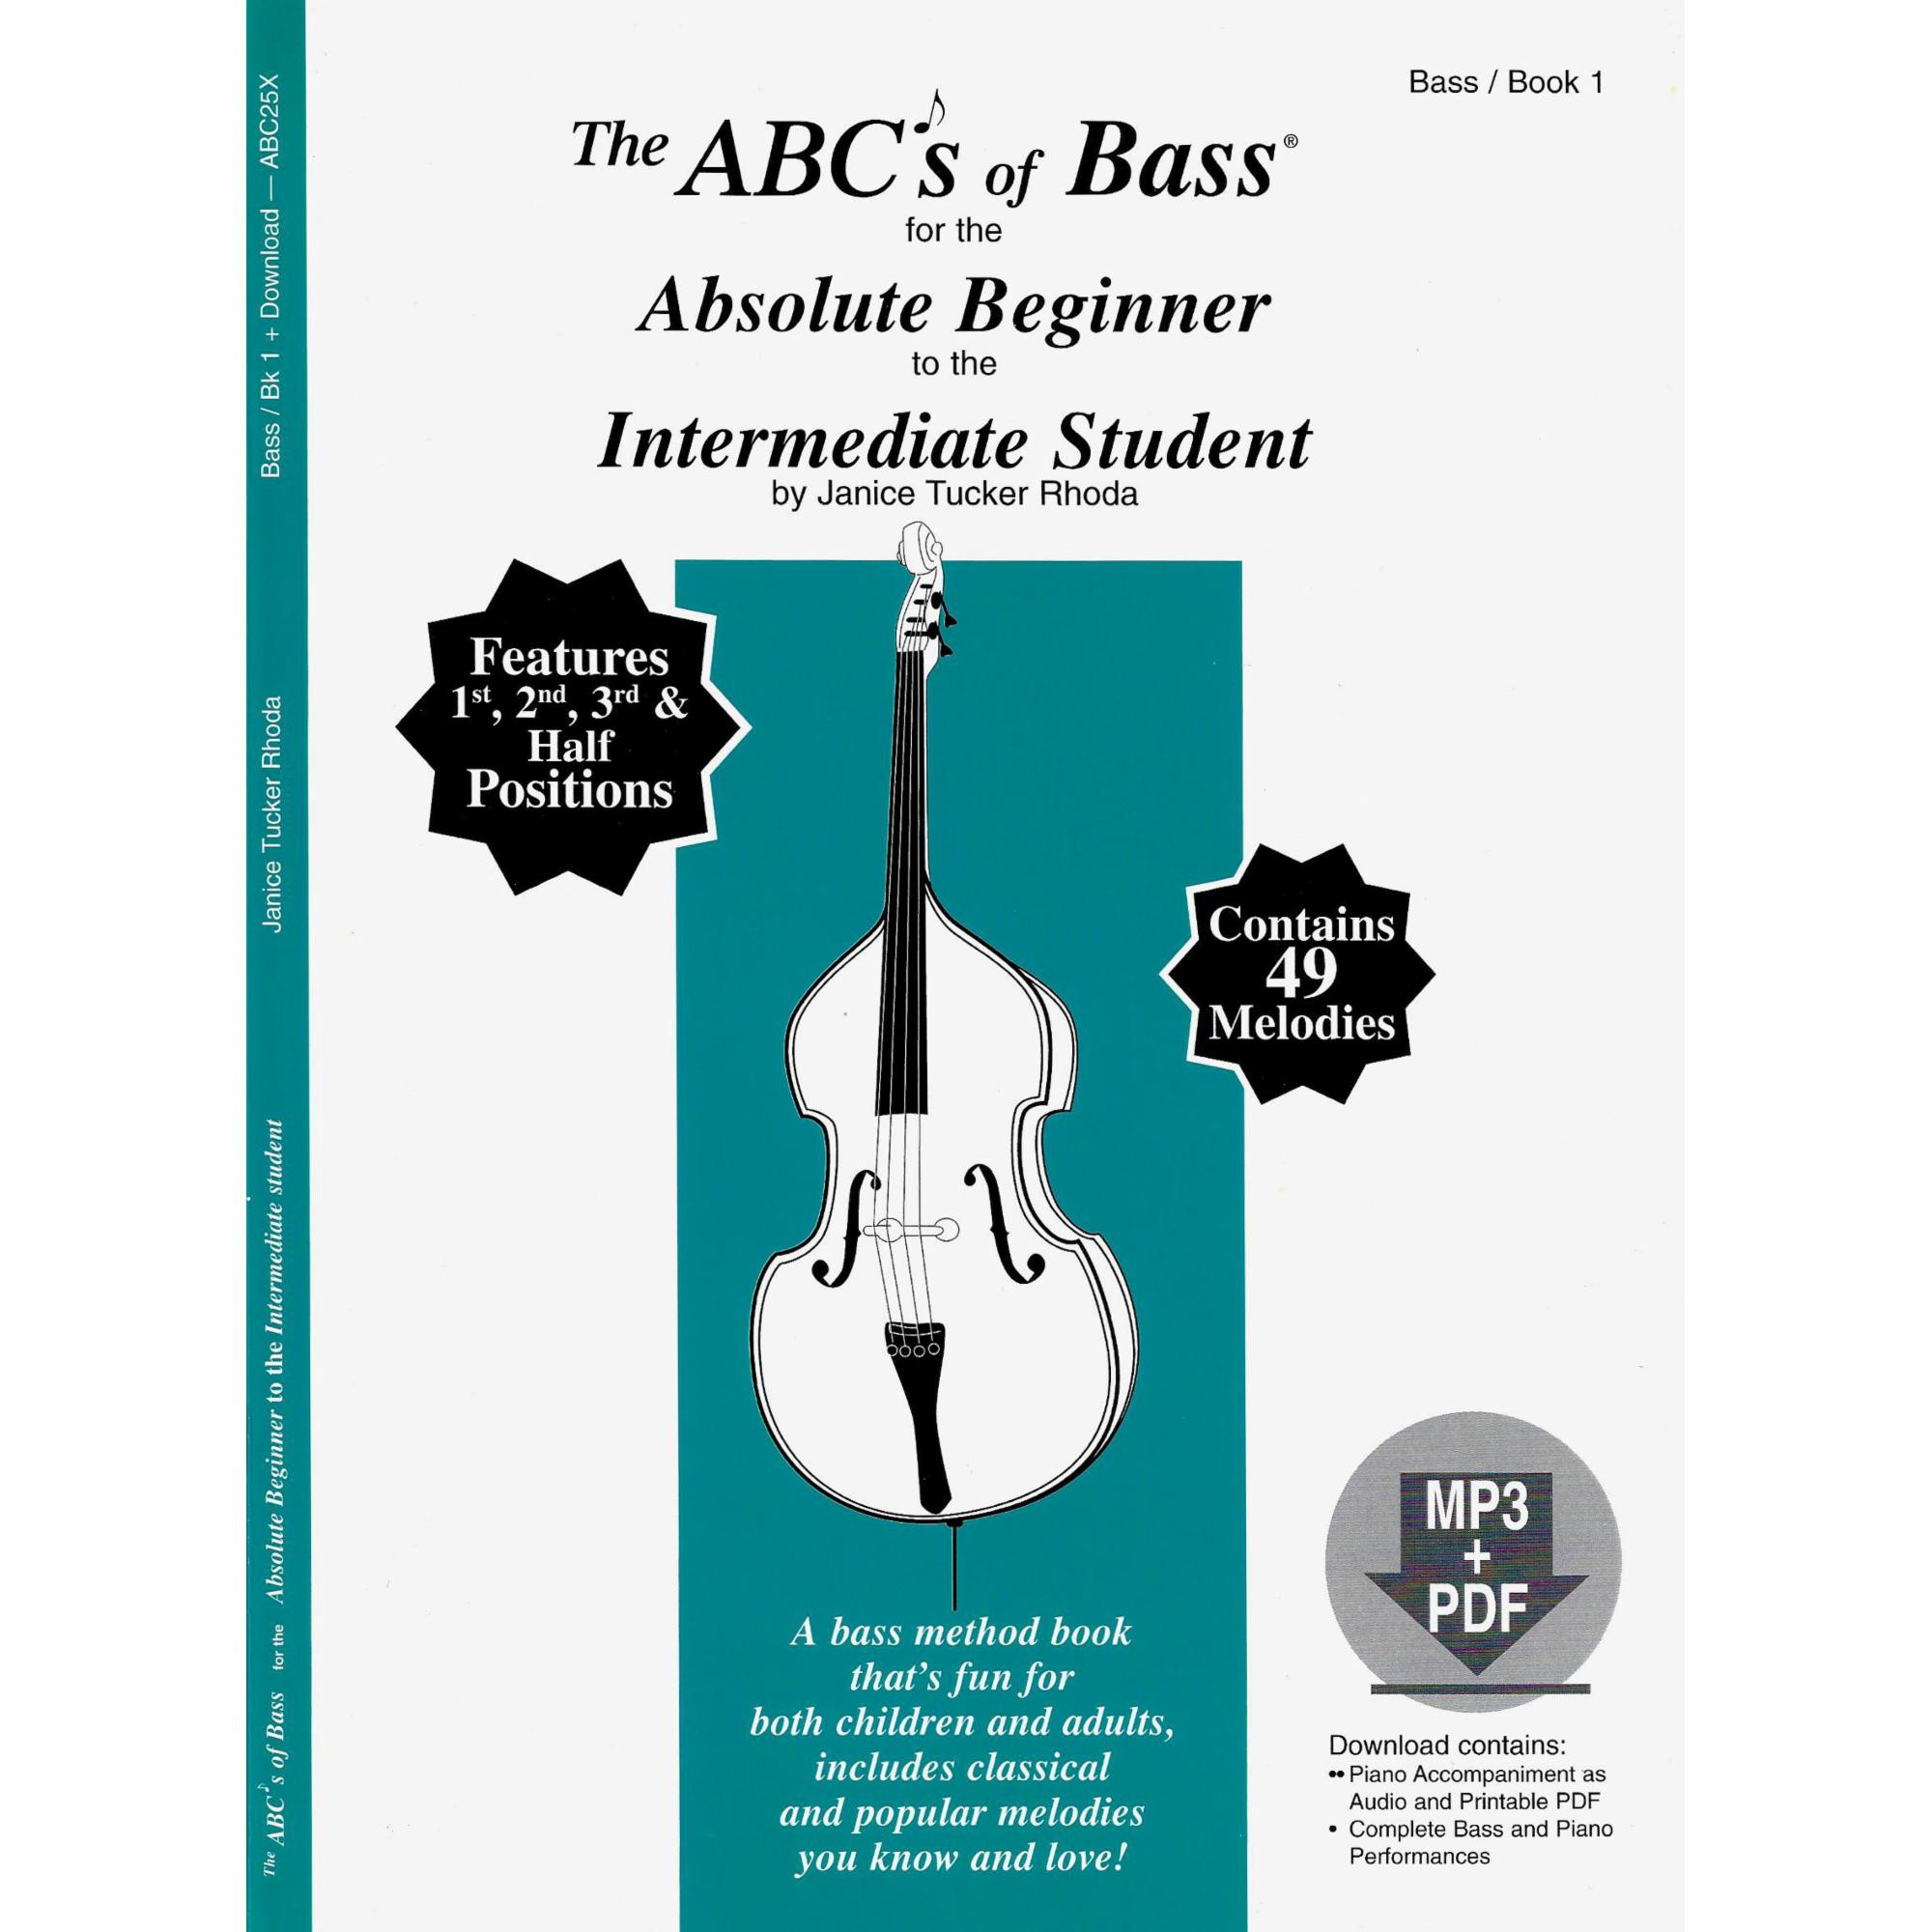 The ABC's of Bass, Books 1-2